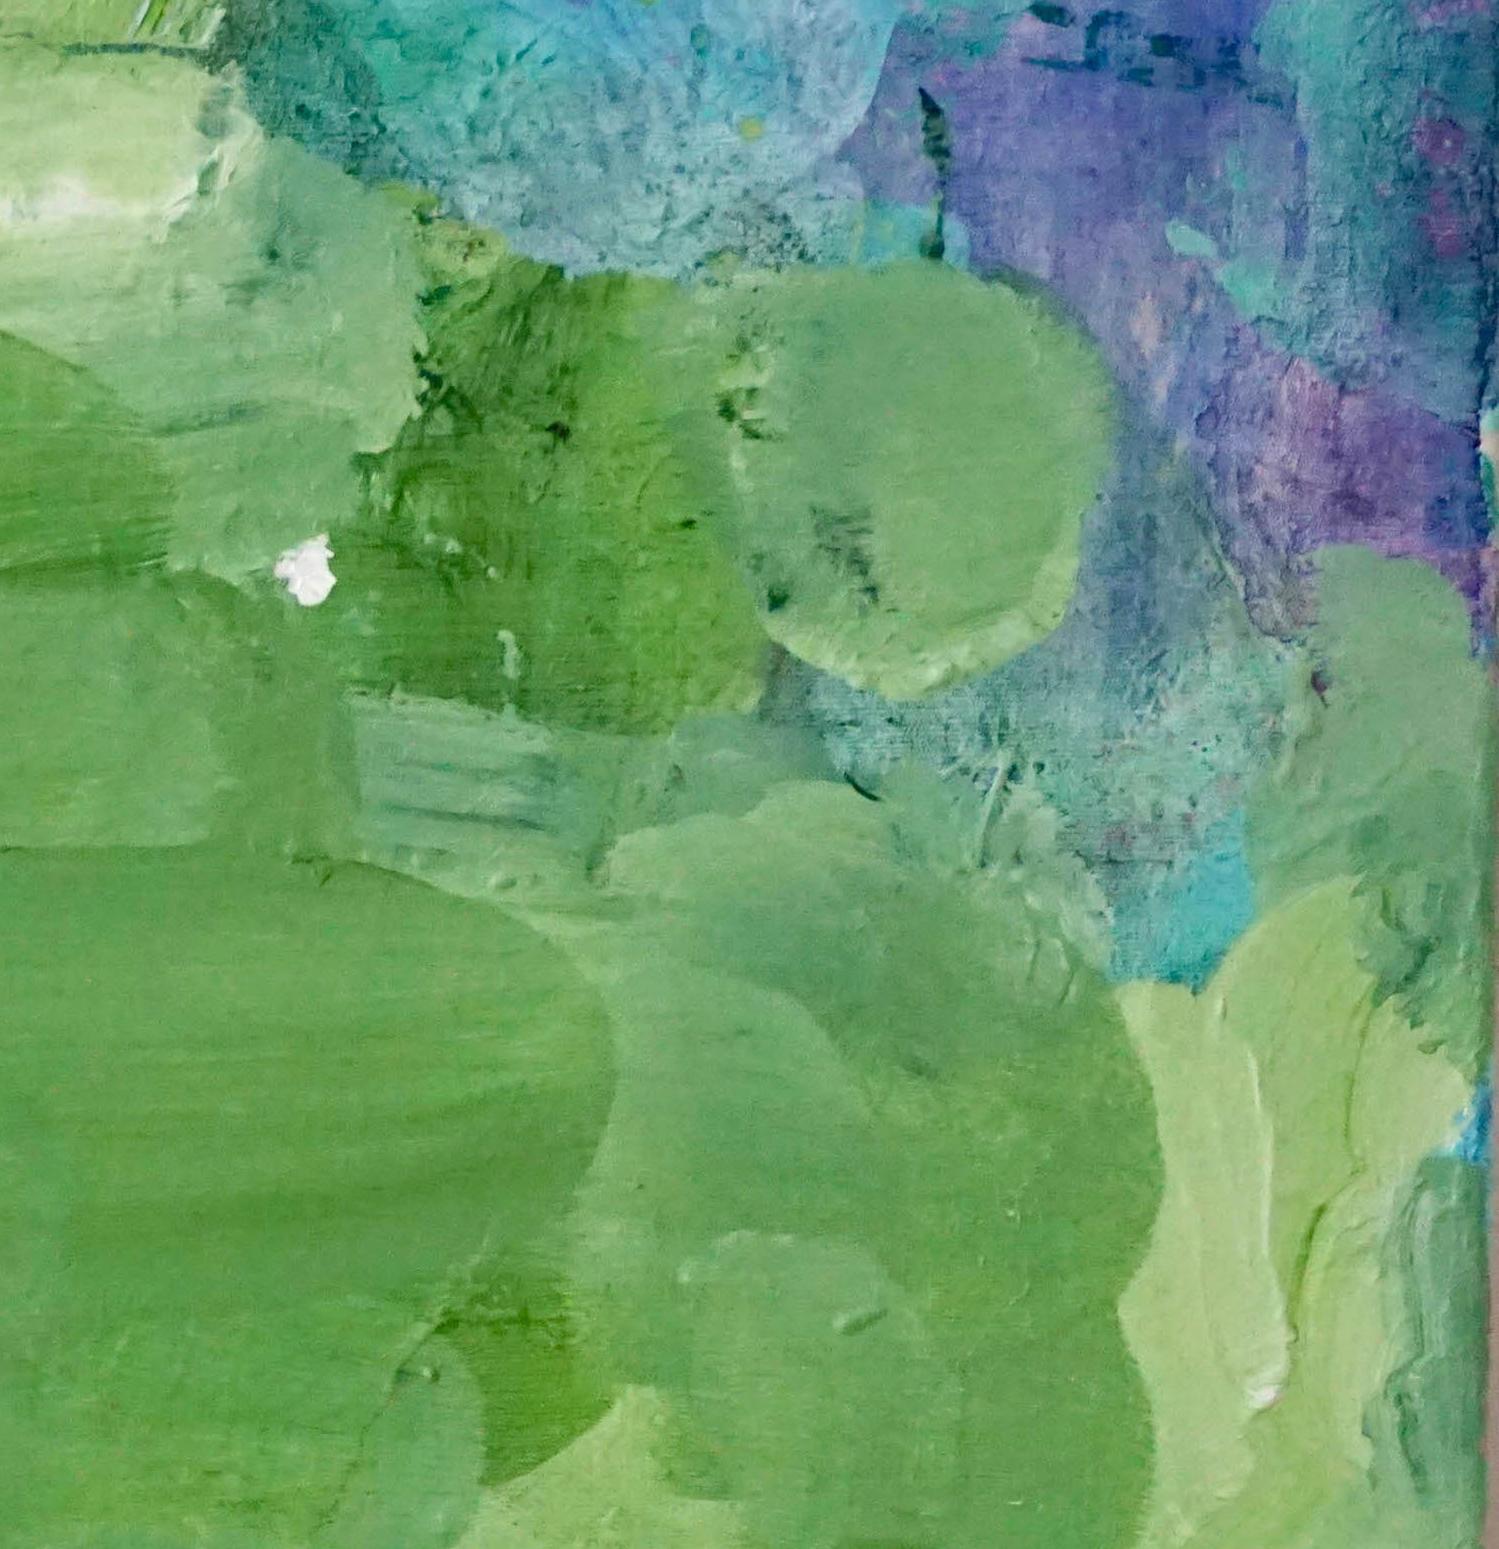 Smile, bright green abstract expressionist painting, lush and verdant - Painting by Lisa Fellerson